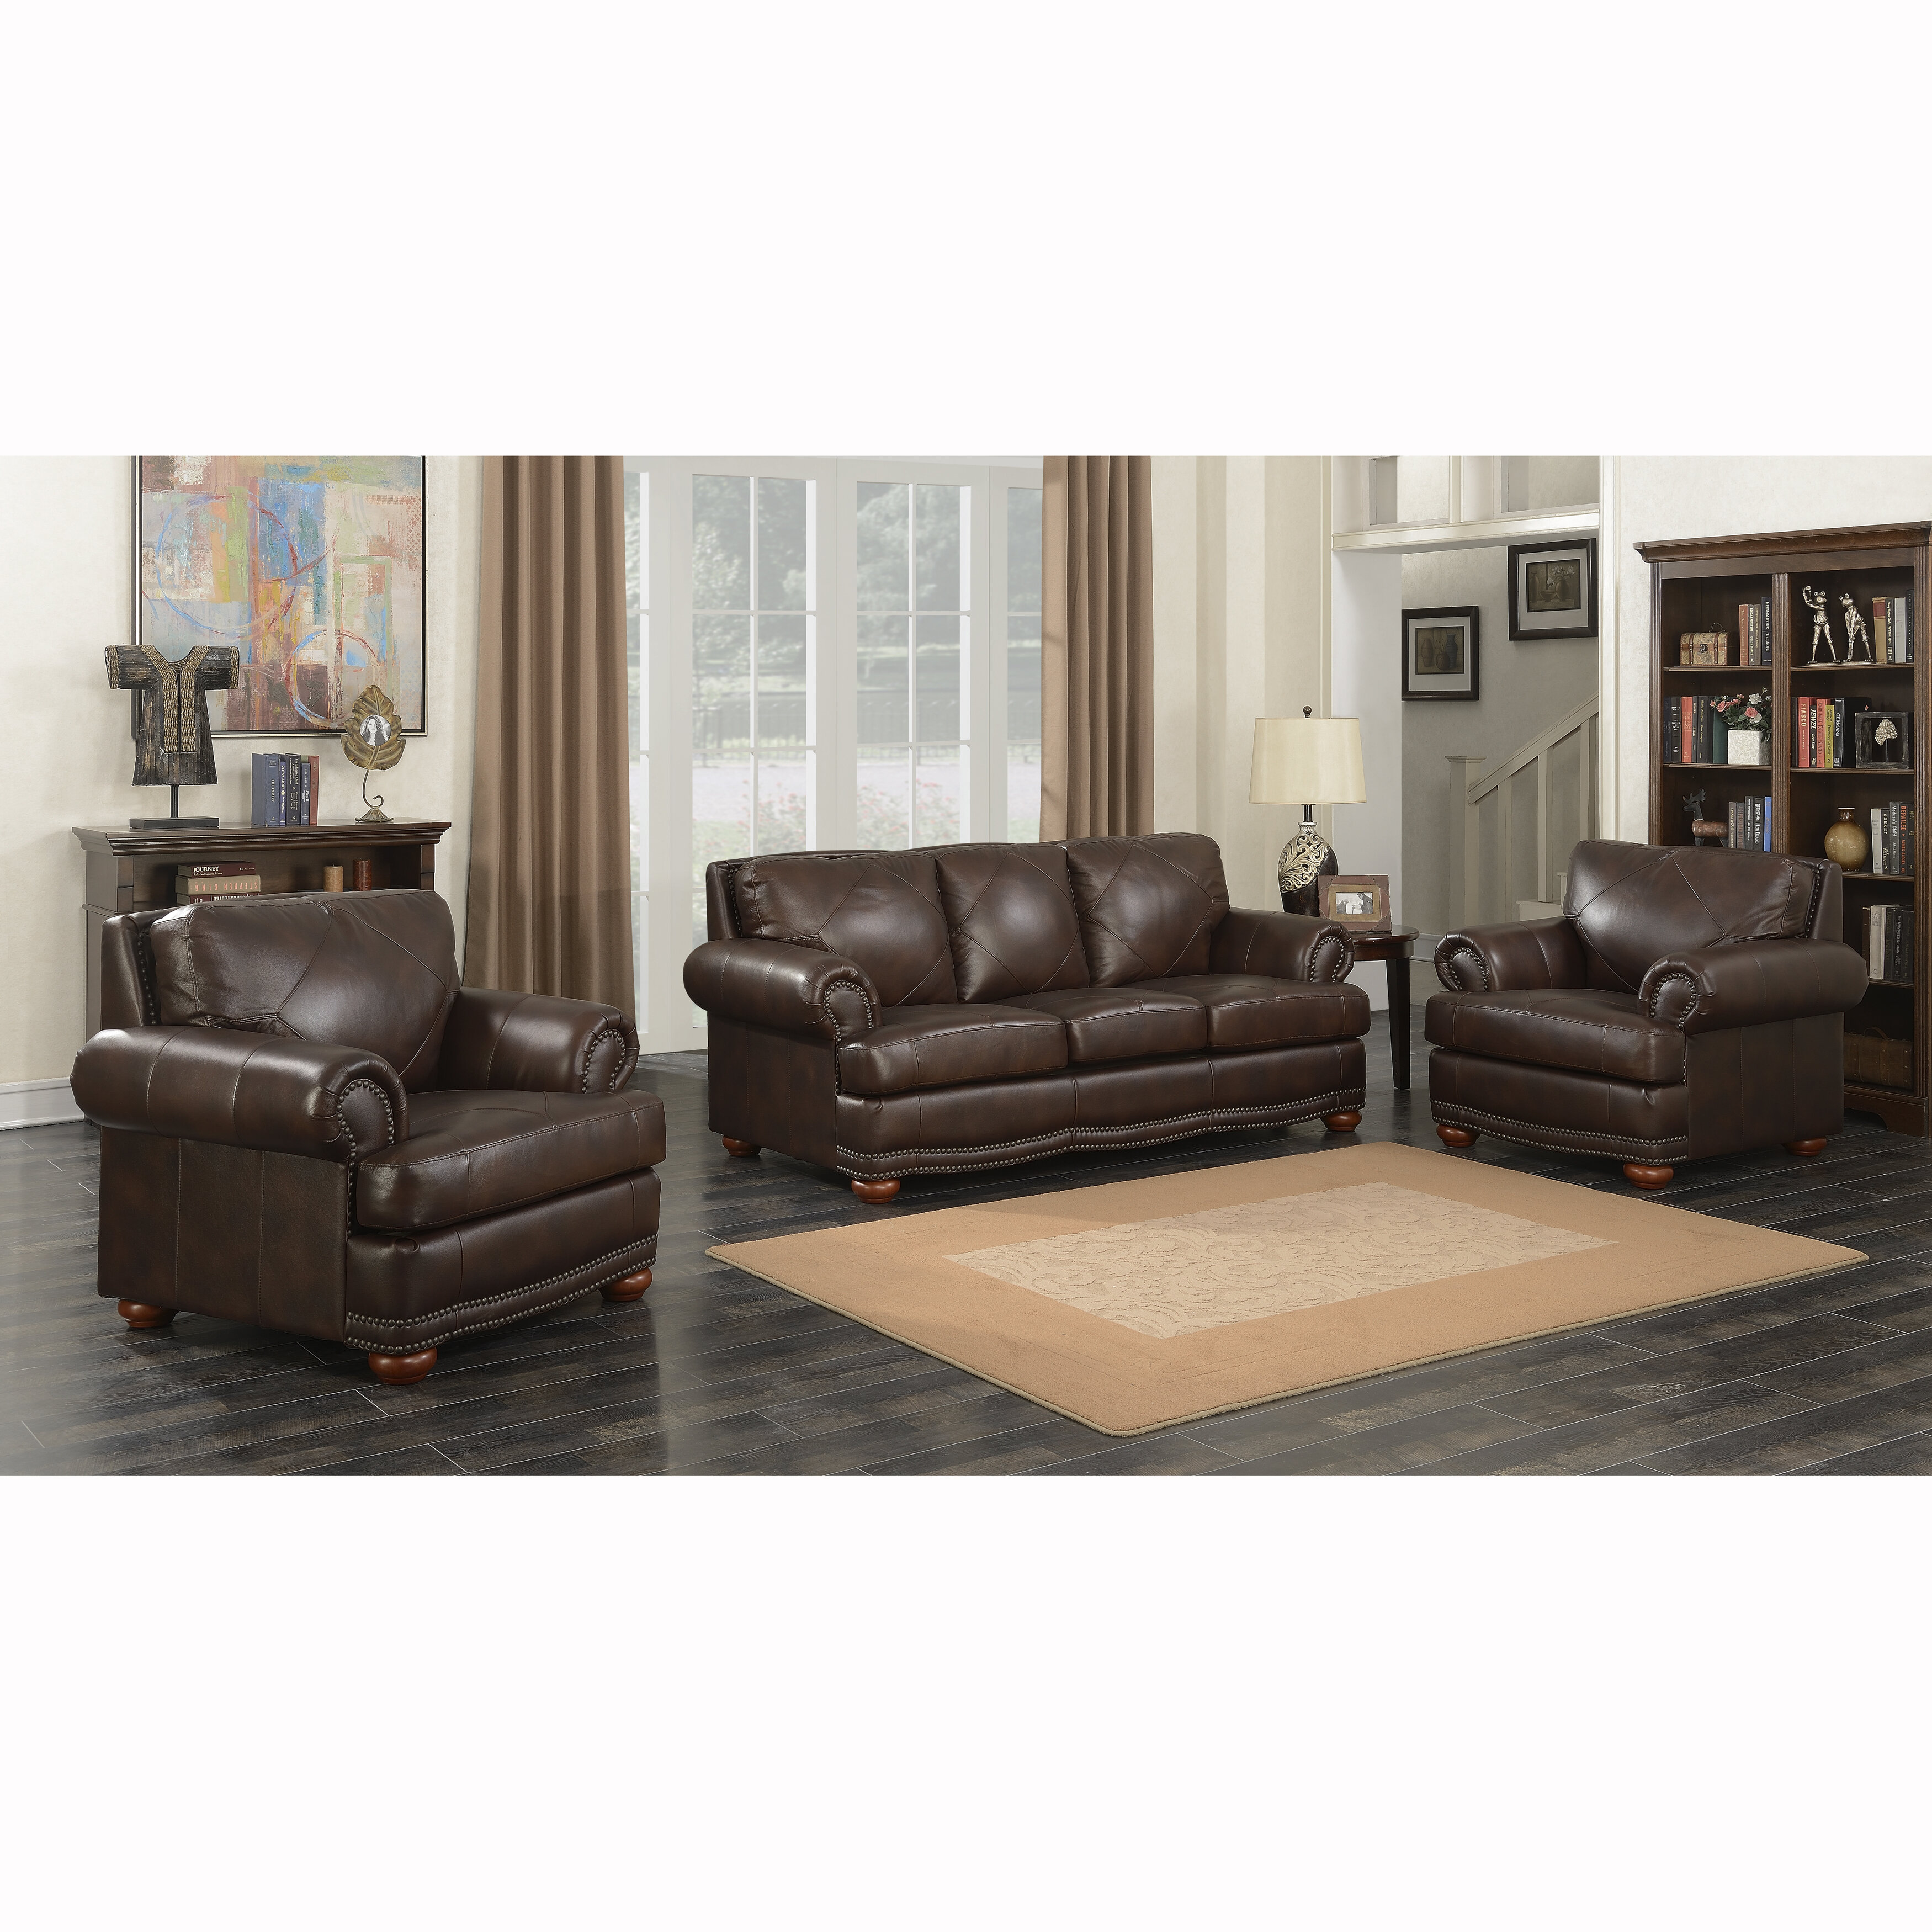 Traditional Living Room 100 Leather 2 Or 3 Piece Sofa Loveseat Chair Set Home Garden Furniture Leather Sofa Sets